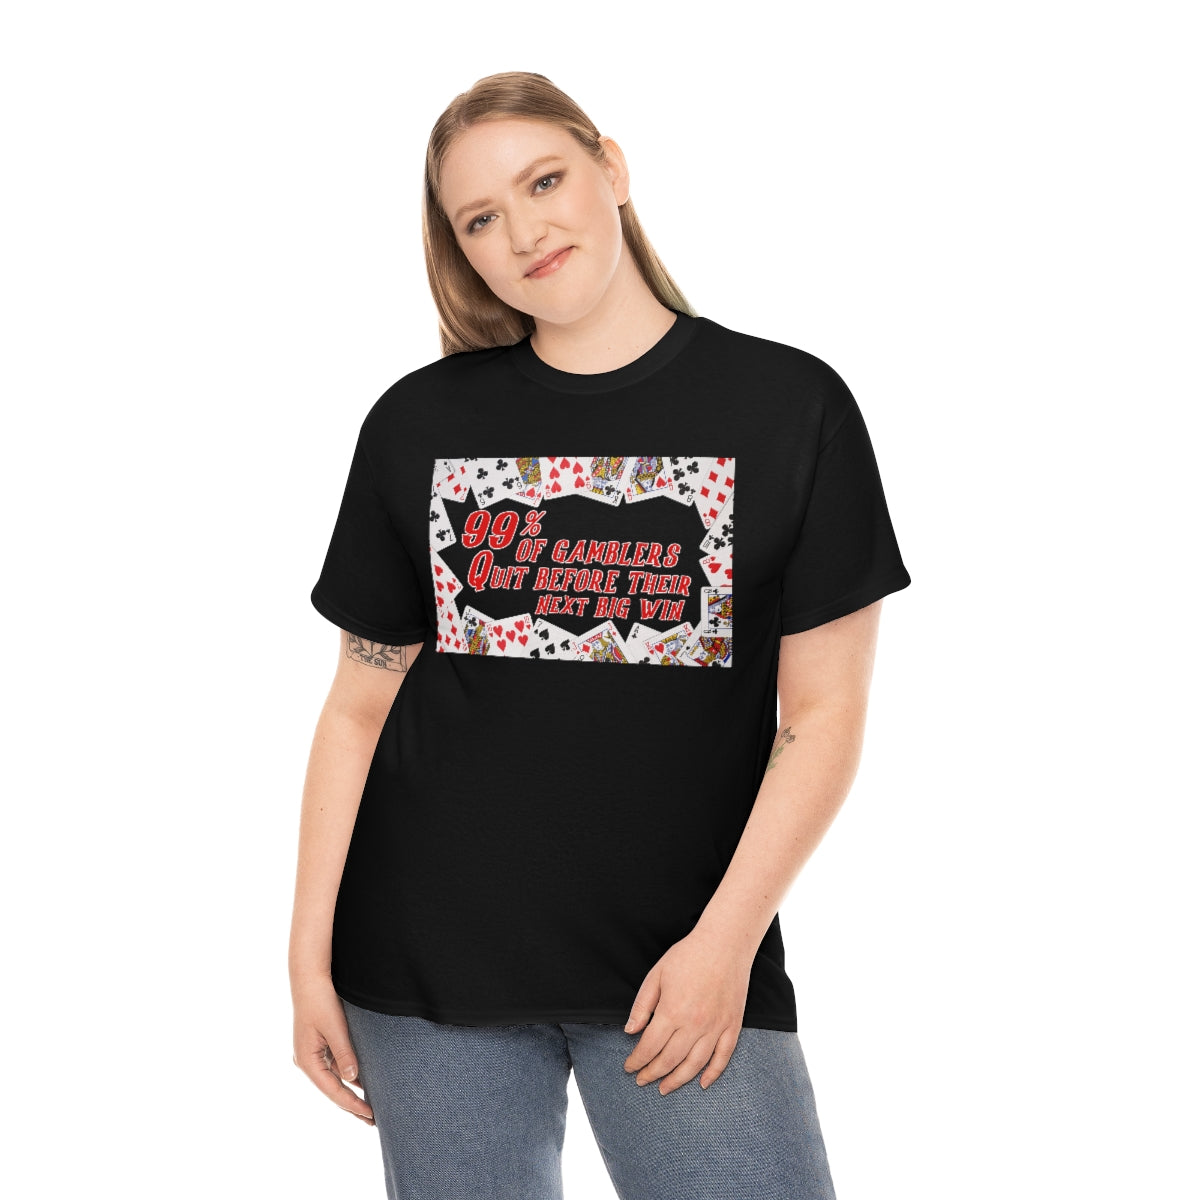 ninety-nine percent of Gamblers Quit before their next big win - Unisex Heavy Cotton Tee - All Colors